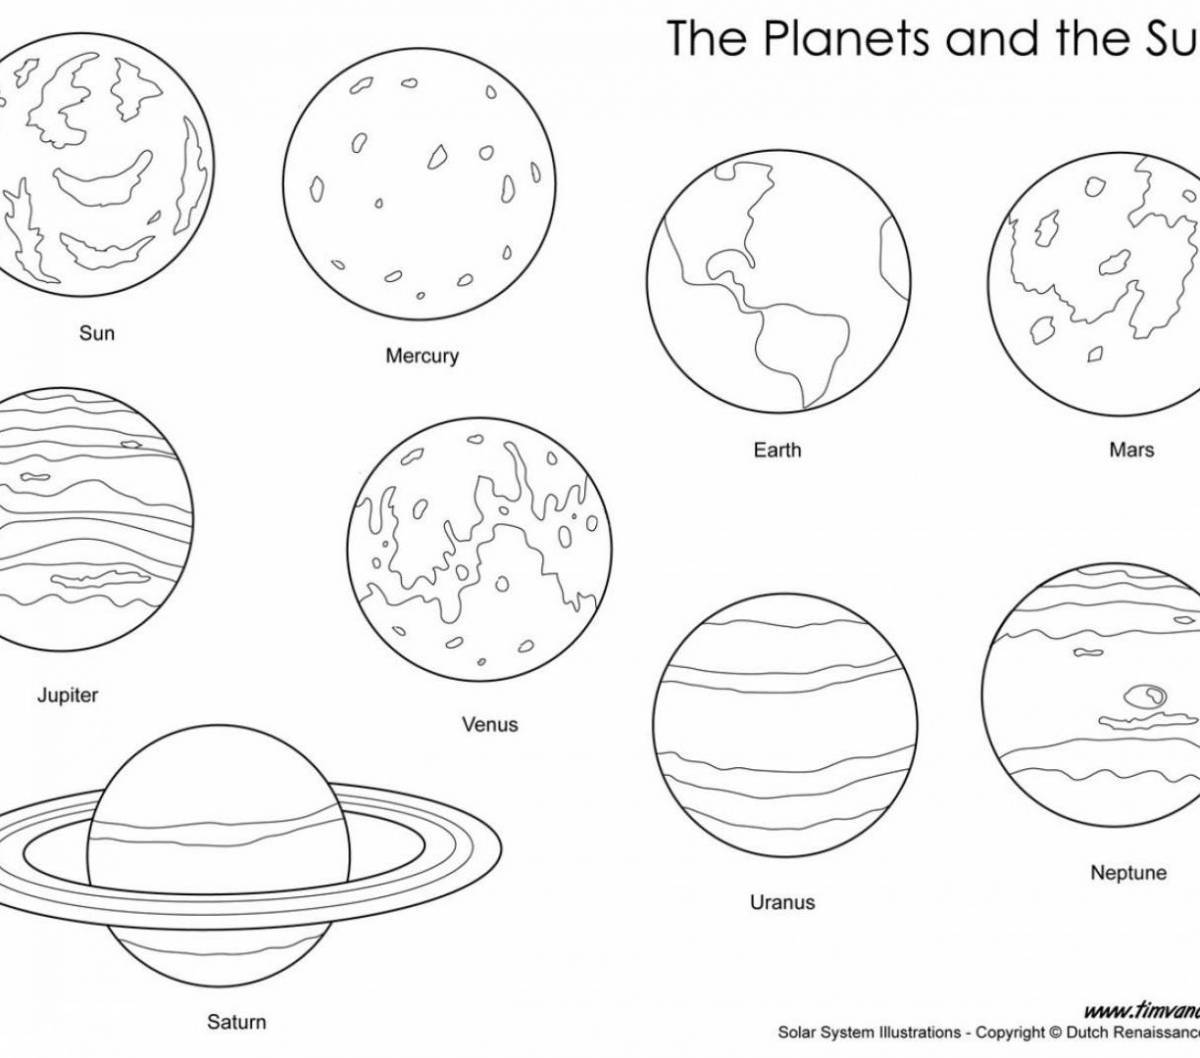 Planets of the solar system for children #11